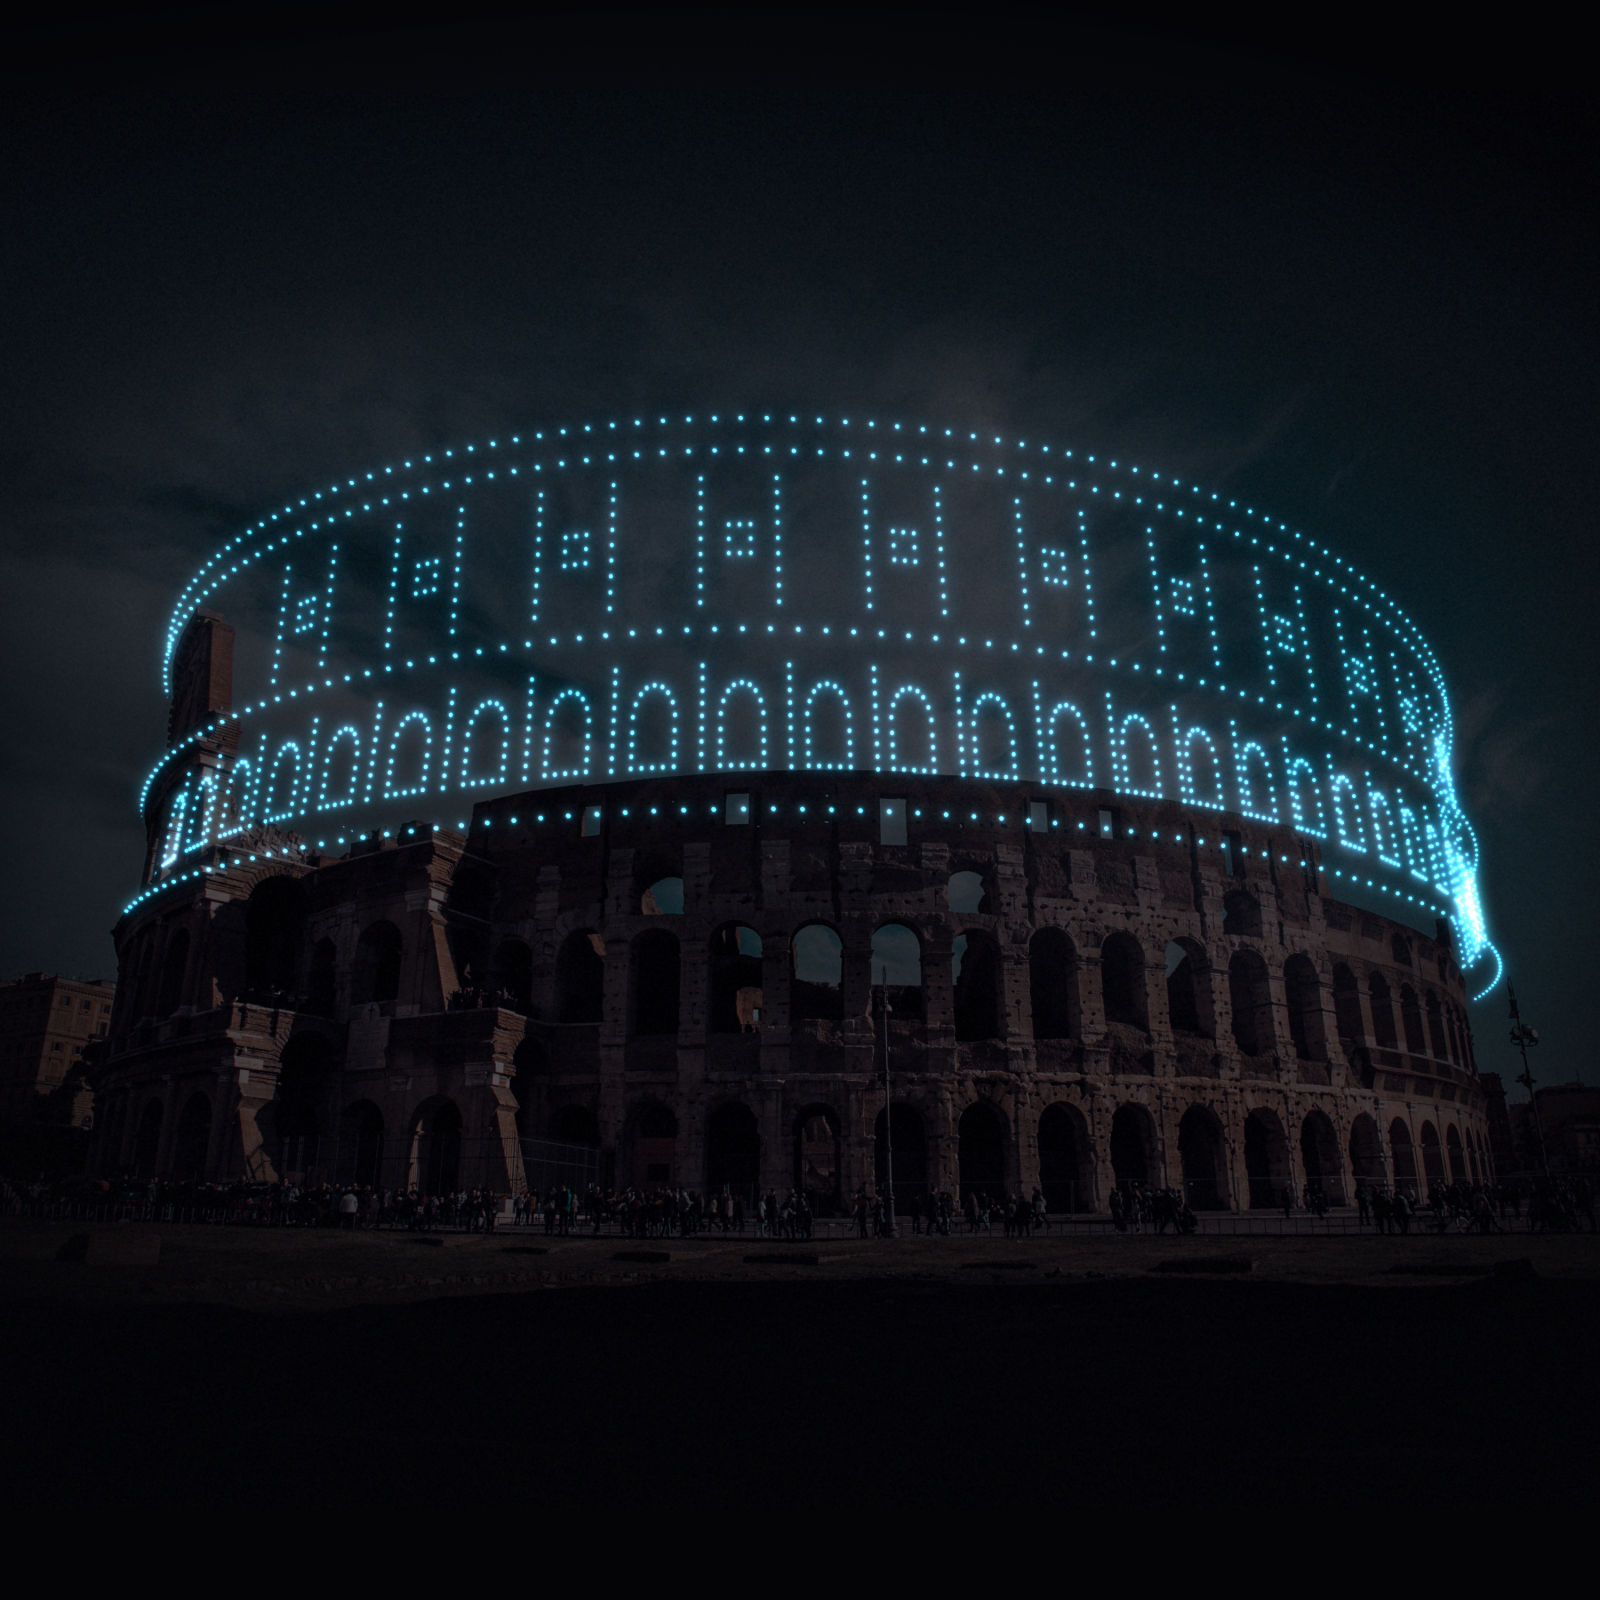 4-Coloseum, Rome RENDER (no need for credits).png